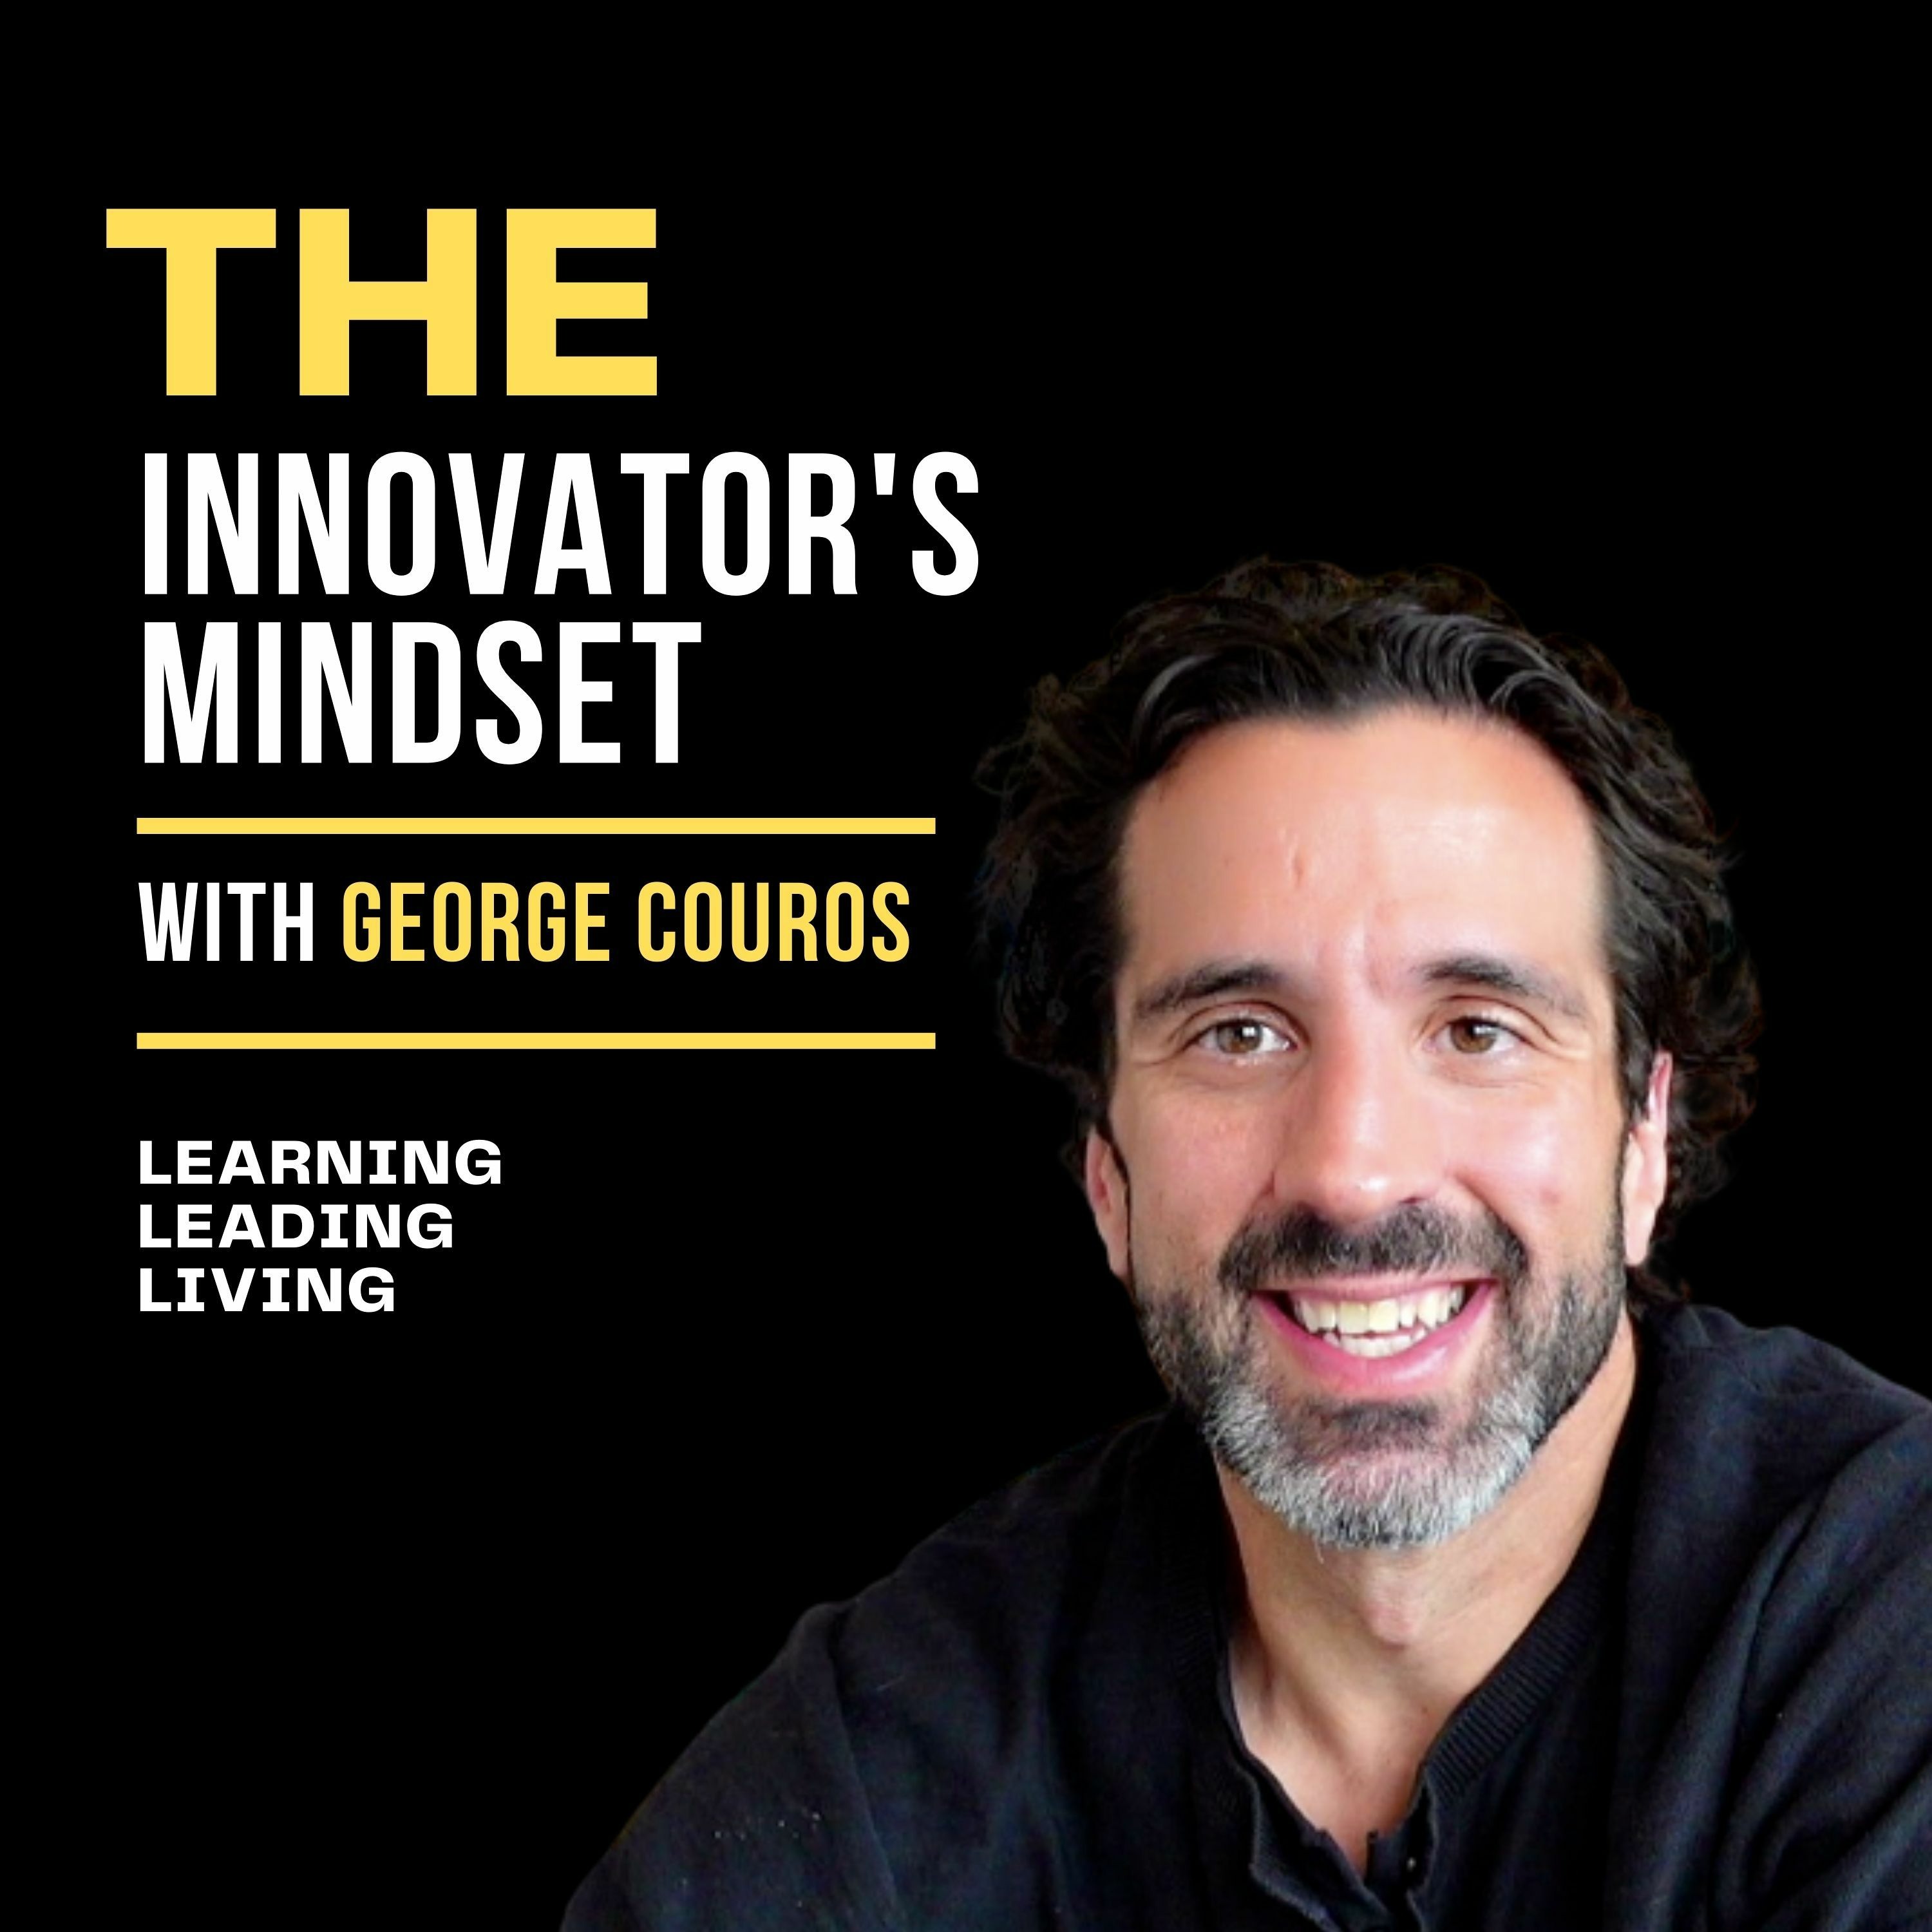 3 Questions on Educators that Inspire with Neil Young - The #InnovatorsMindset #Podcast